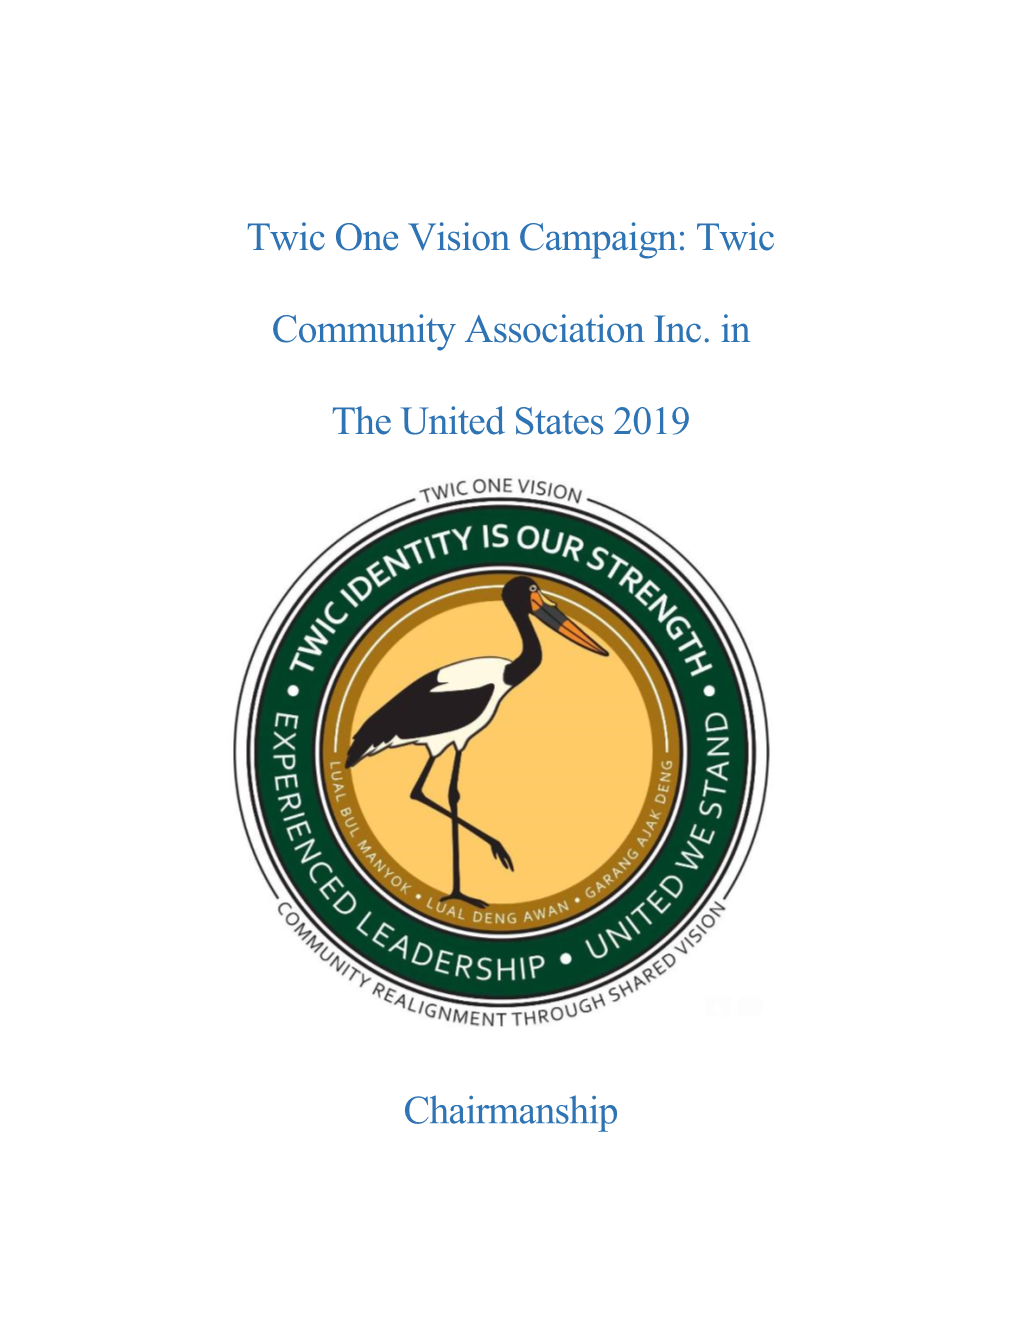 Twic One Vision Campaign: Twic Community Association Inc. in The